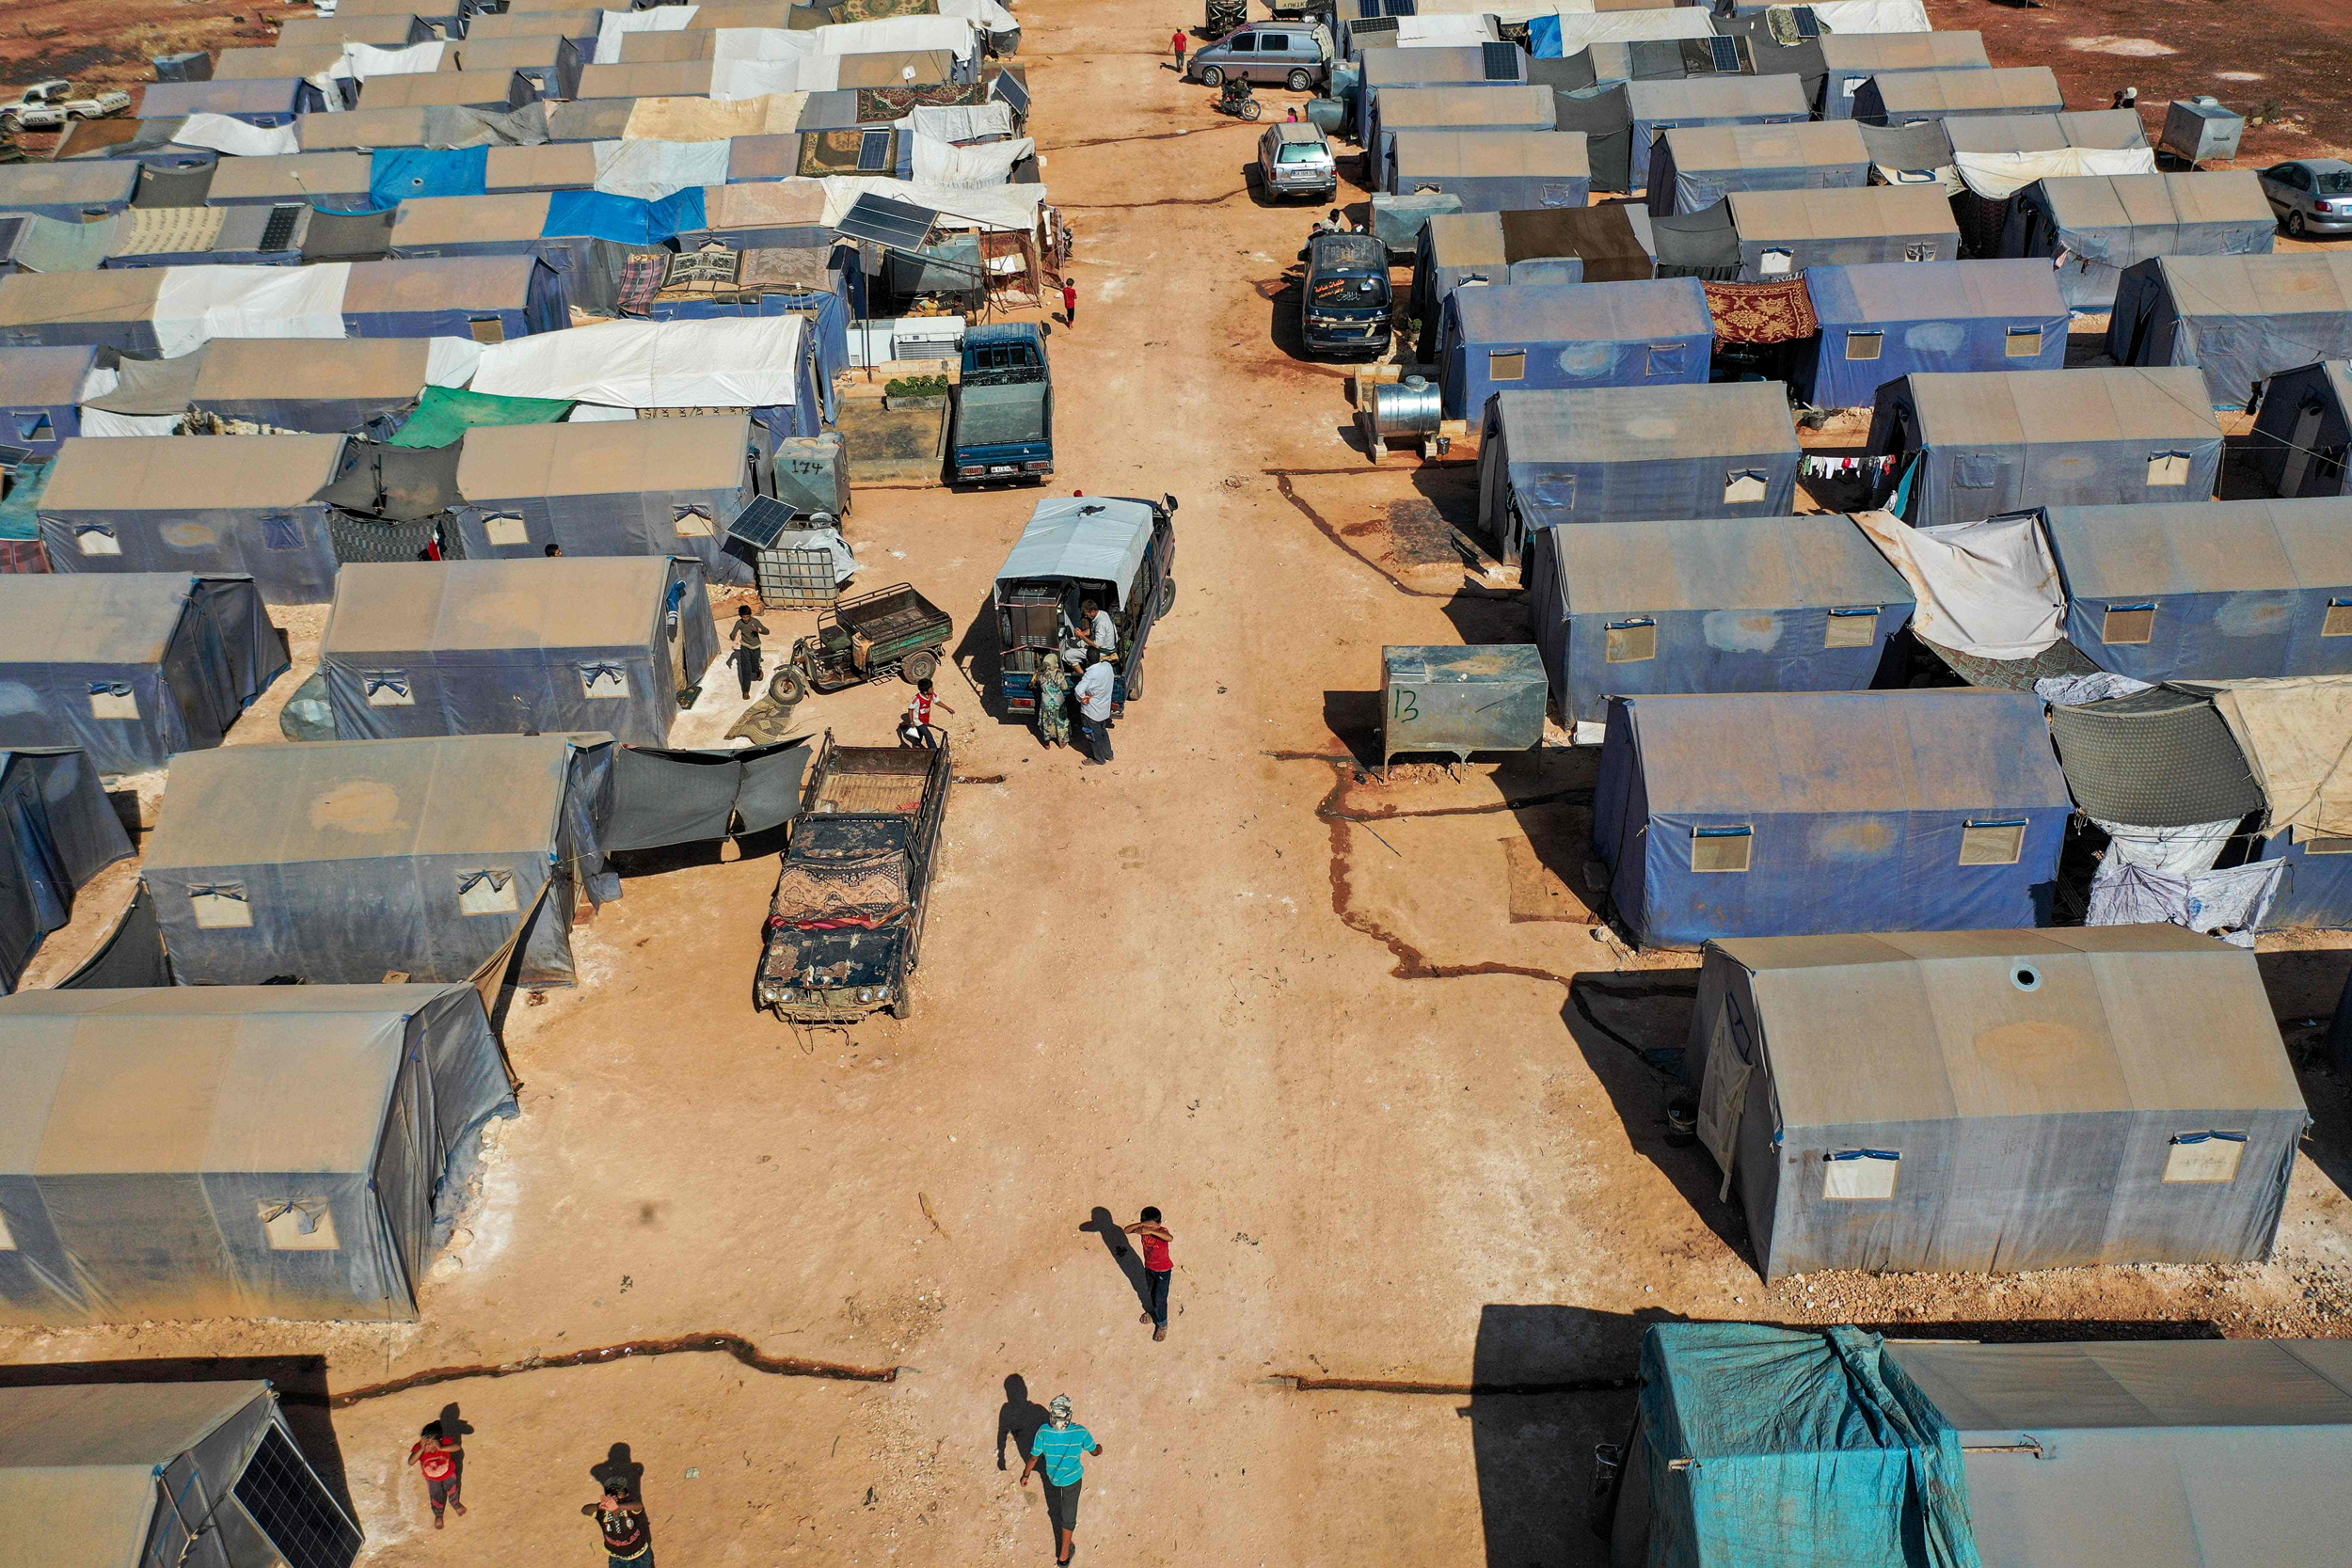 This picture taken on July 9, 2020 shows an aerial view of tents at the Azraq camp for displaced Syrians near the town of Maaret Misrin in Syria's northwestern Idlib province, sheltering several hundred families displaced by conflict from the northern Hama and southern and eastern Idlib countrysides. - Displaced Syrians relying on humanitarian assistance voiced alarm after regime ally Russia tried to reduce cross-border aid to millions in the northwest of the war-torn country. The Russian motion at the UN Security Council was voted down, but a council resolution authorising aid deliveries through the Turkish border expires on July 10. An estimated 2.8 million people depend on aid in northwest Syria, including in the country's last major opposition bastion of Idlib, the United Nations says. (Photo by Omar HAJ KADOUR / AFP) (Photo by OMAR HAJ KADOUR/AFP via Getty Images)